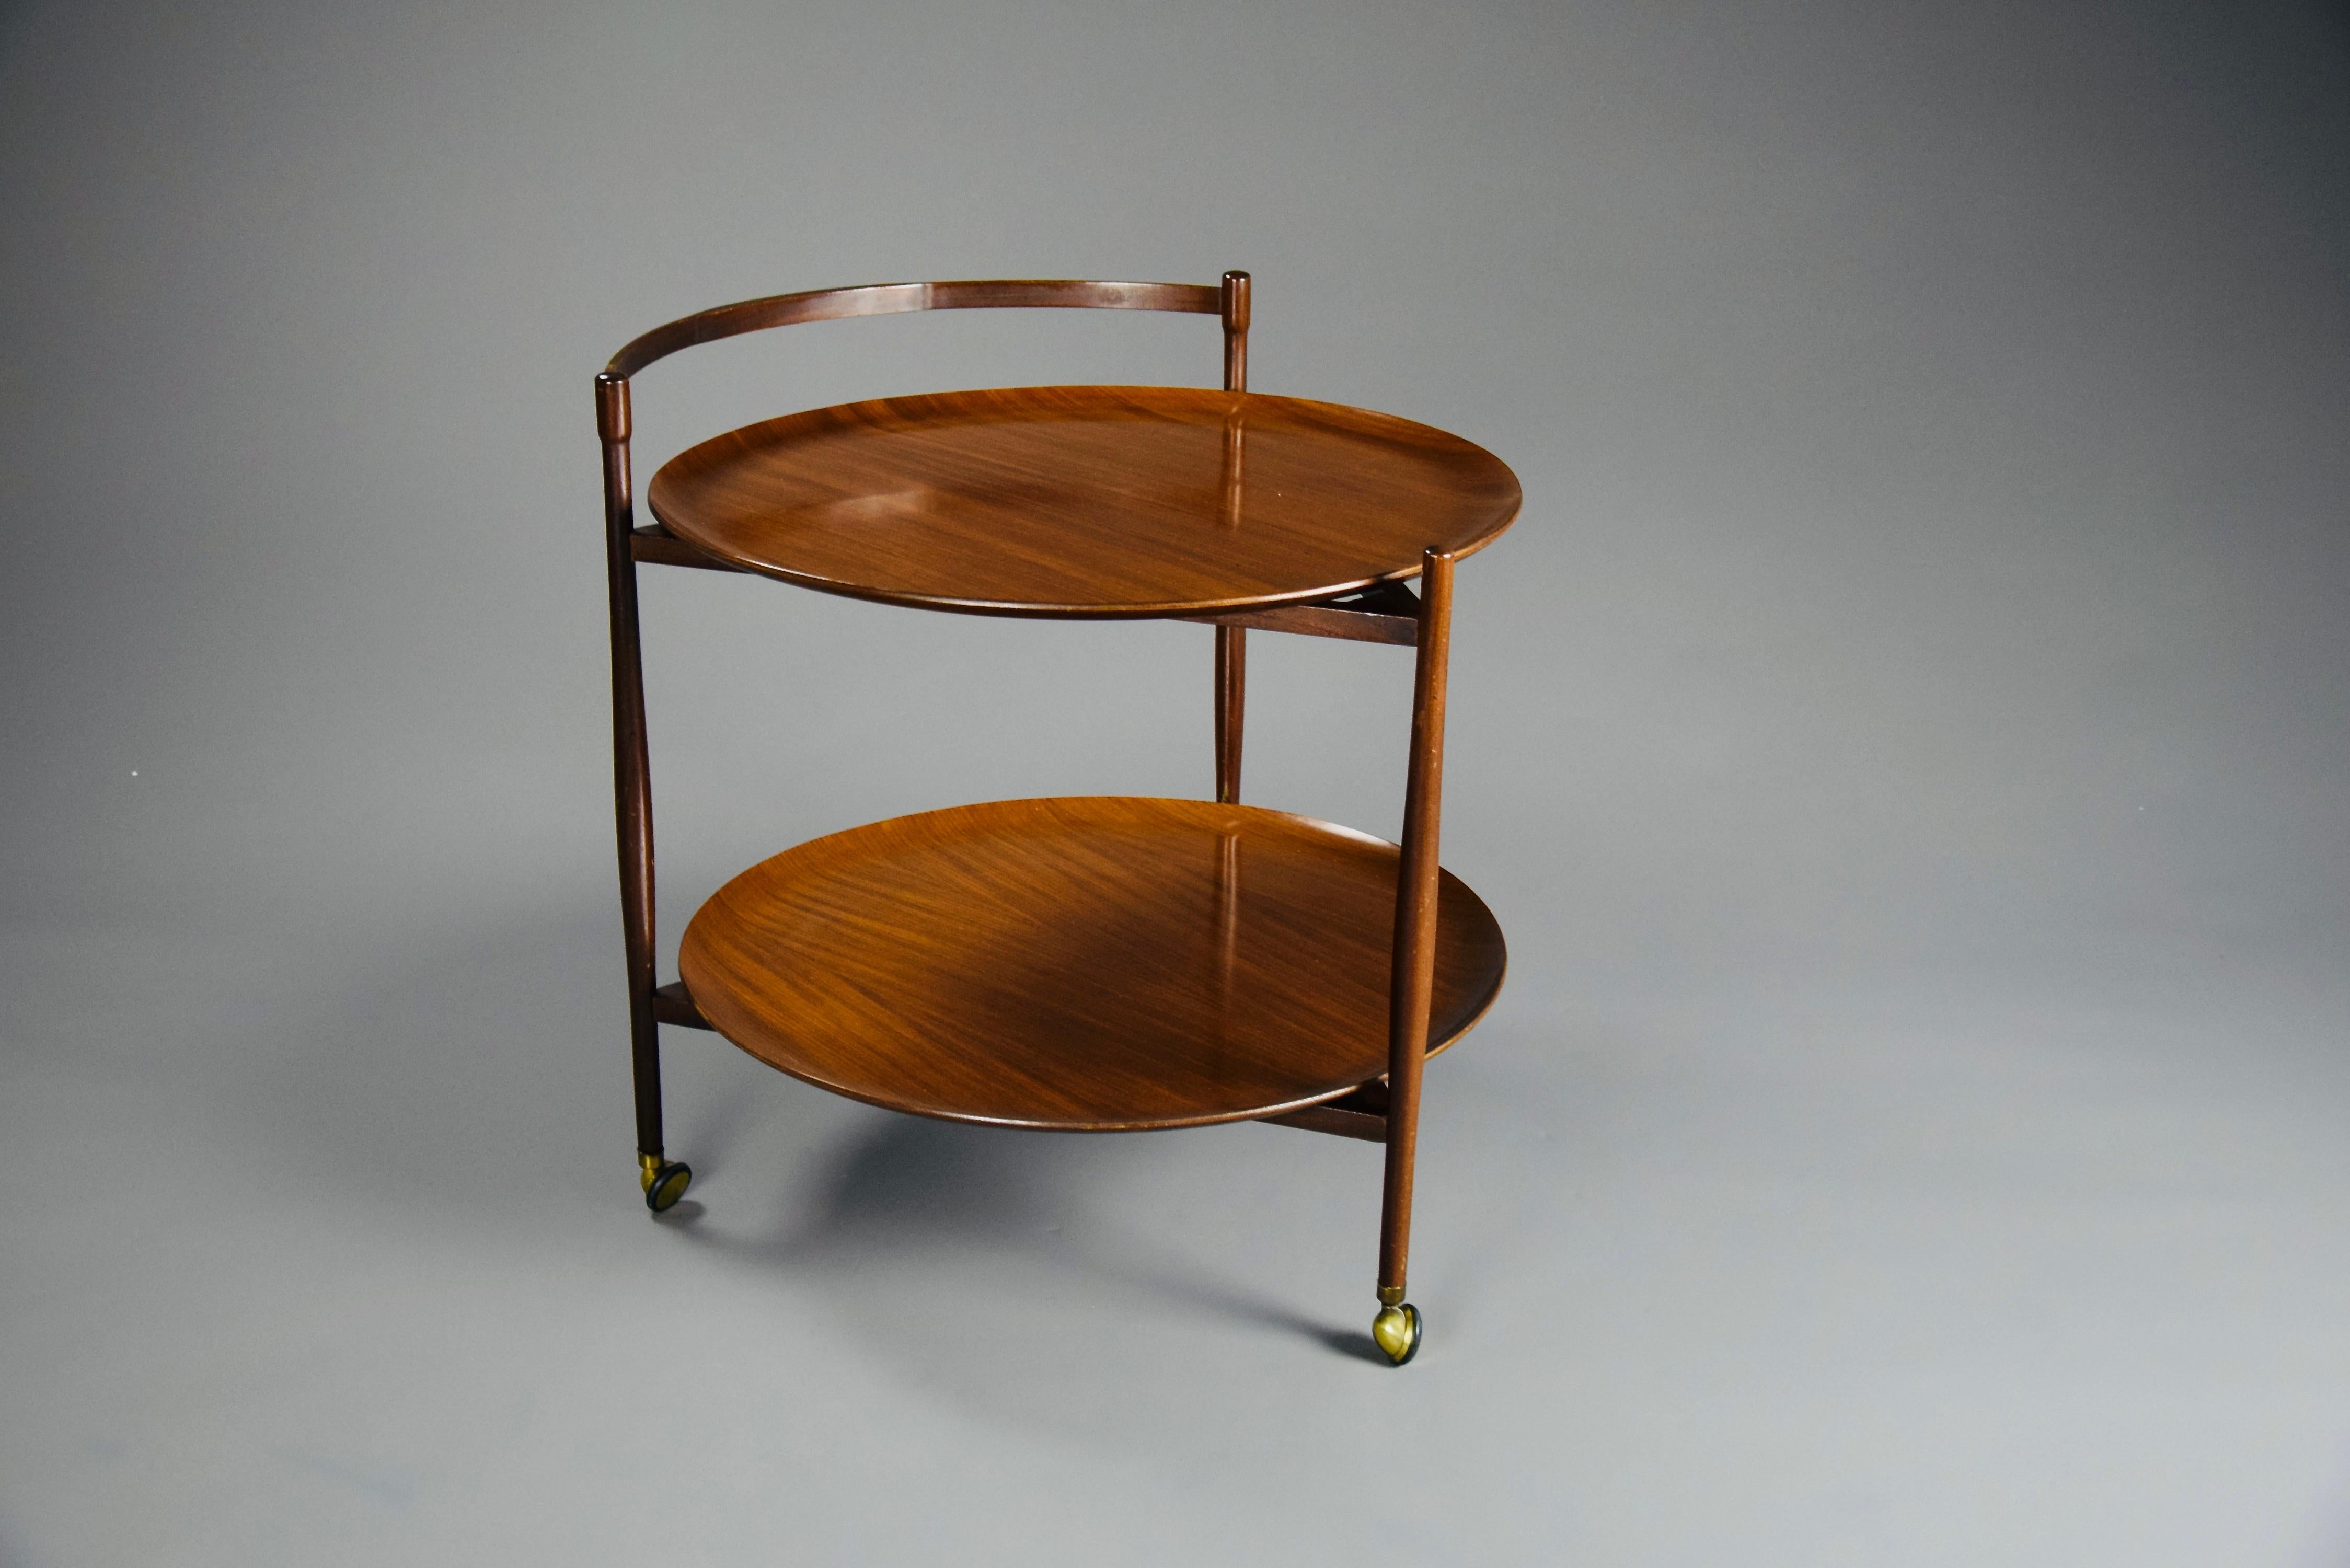 Plywood Italian Mid-Century Modern Wooden Two Tier Serving Cart For Sale